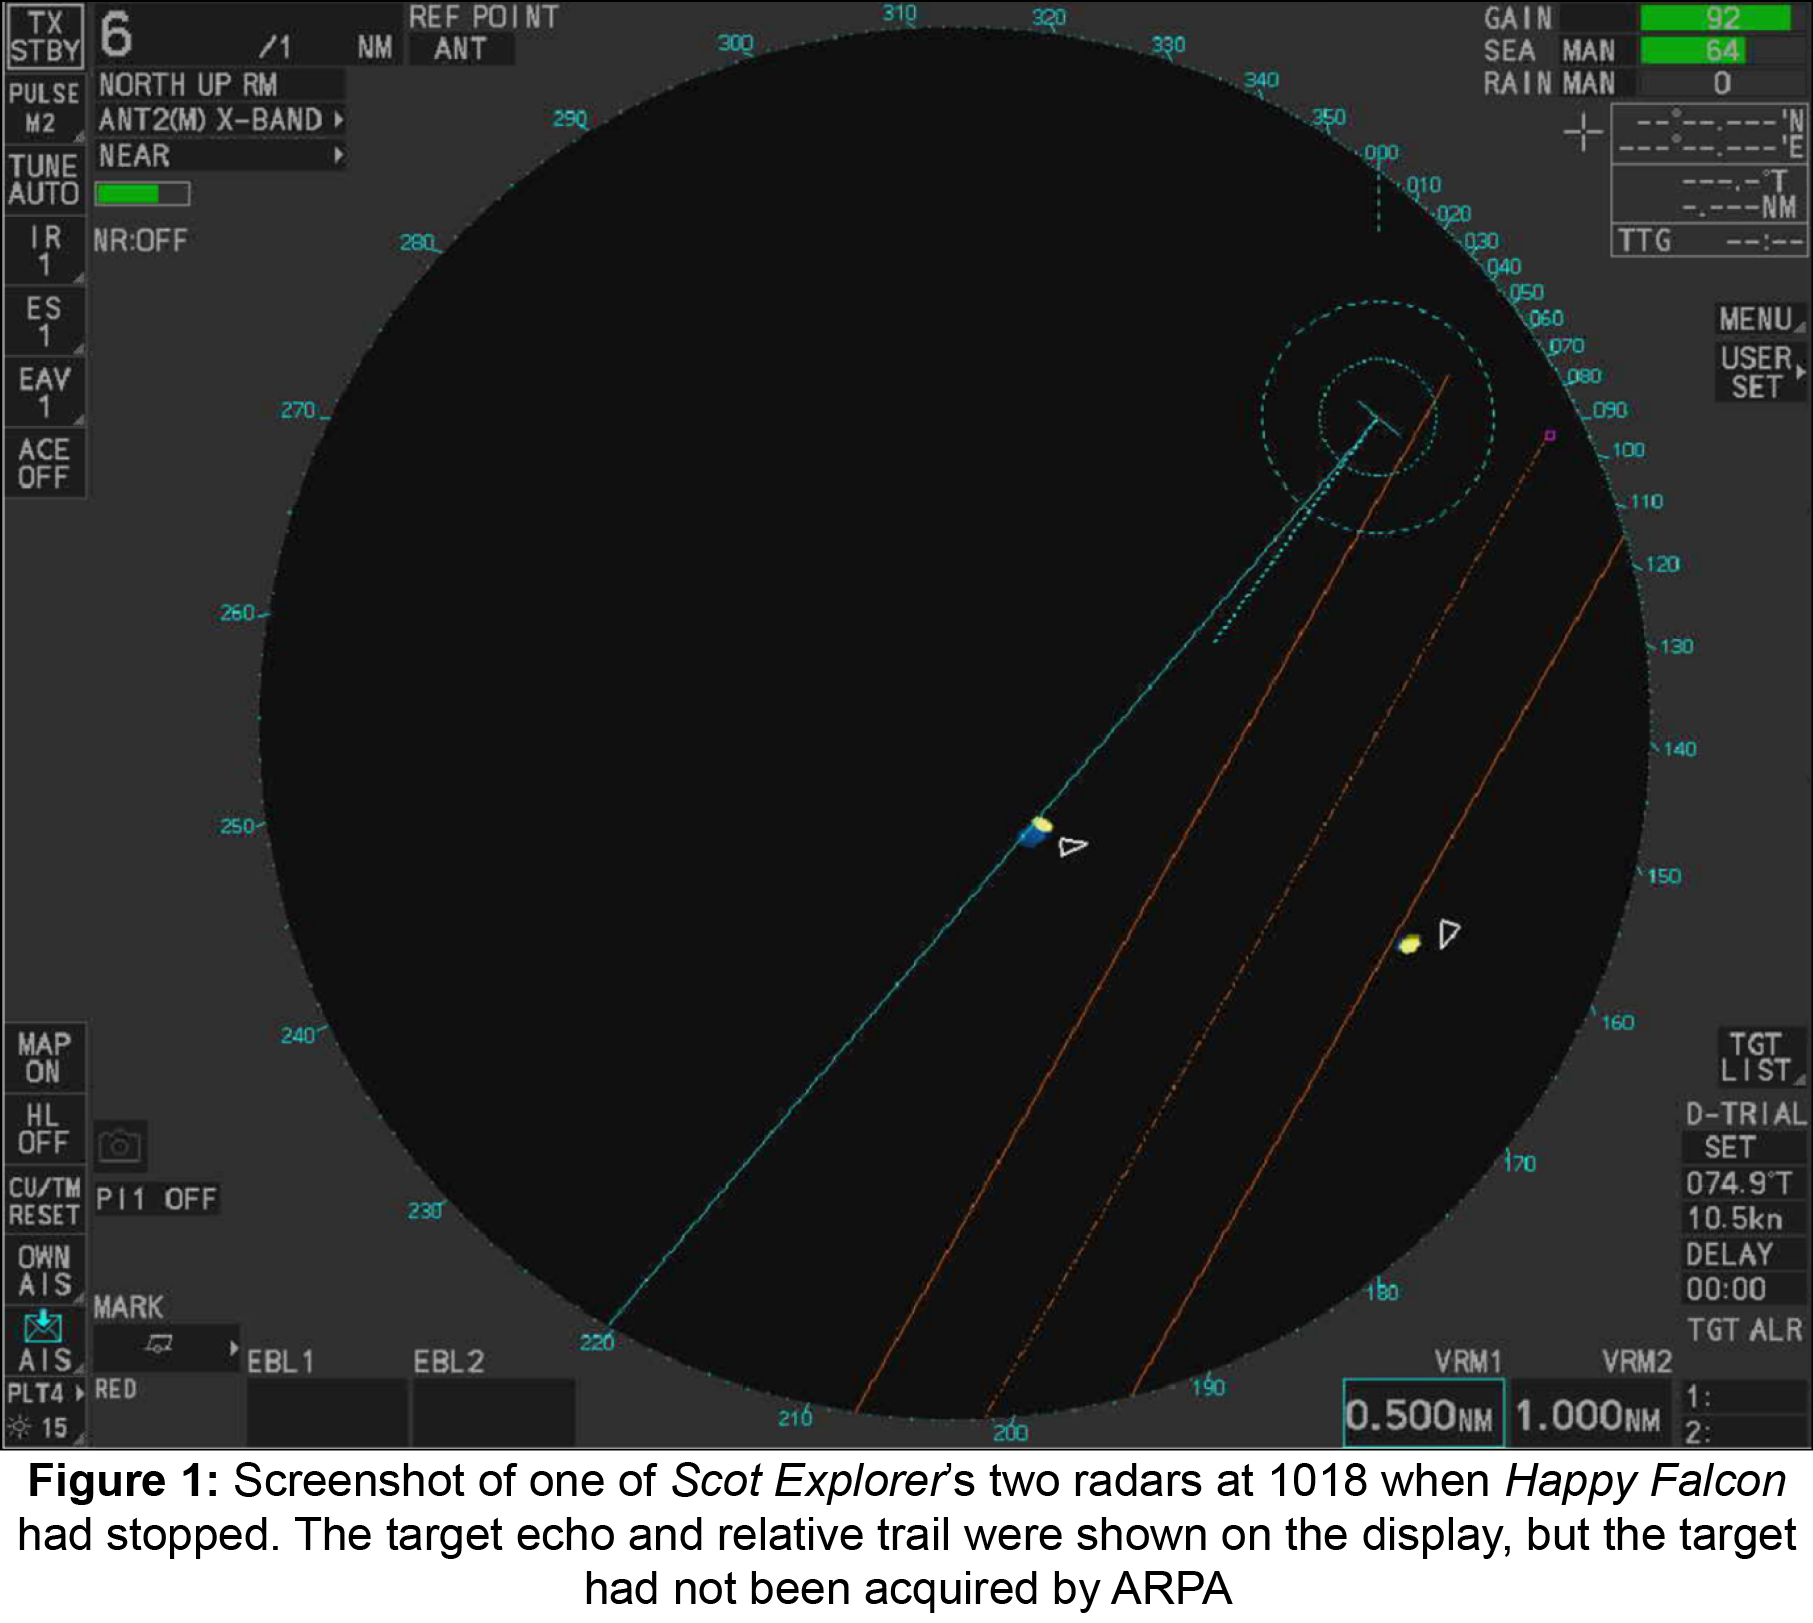 Scot Explorer Figure 1 - Screenshot of one of Scot Explorer’s two radars at 1018 when Happy Falcon had stopped -The target echo and relative trail were shown on the display, but the target had not been acquired by ARPA